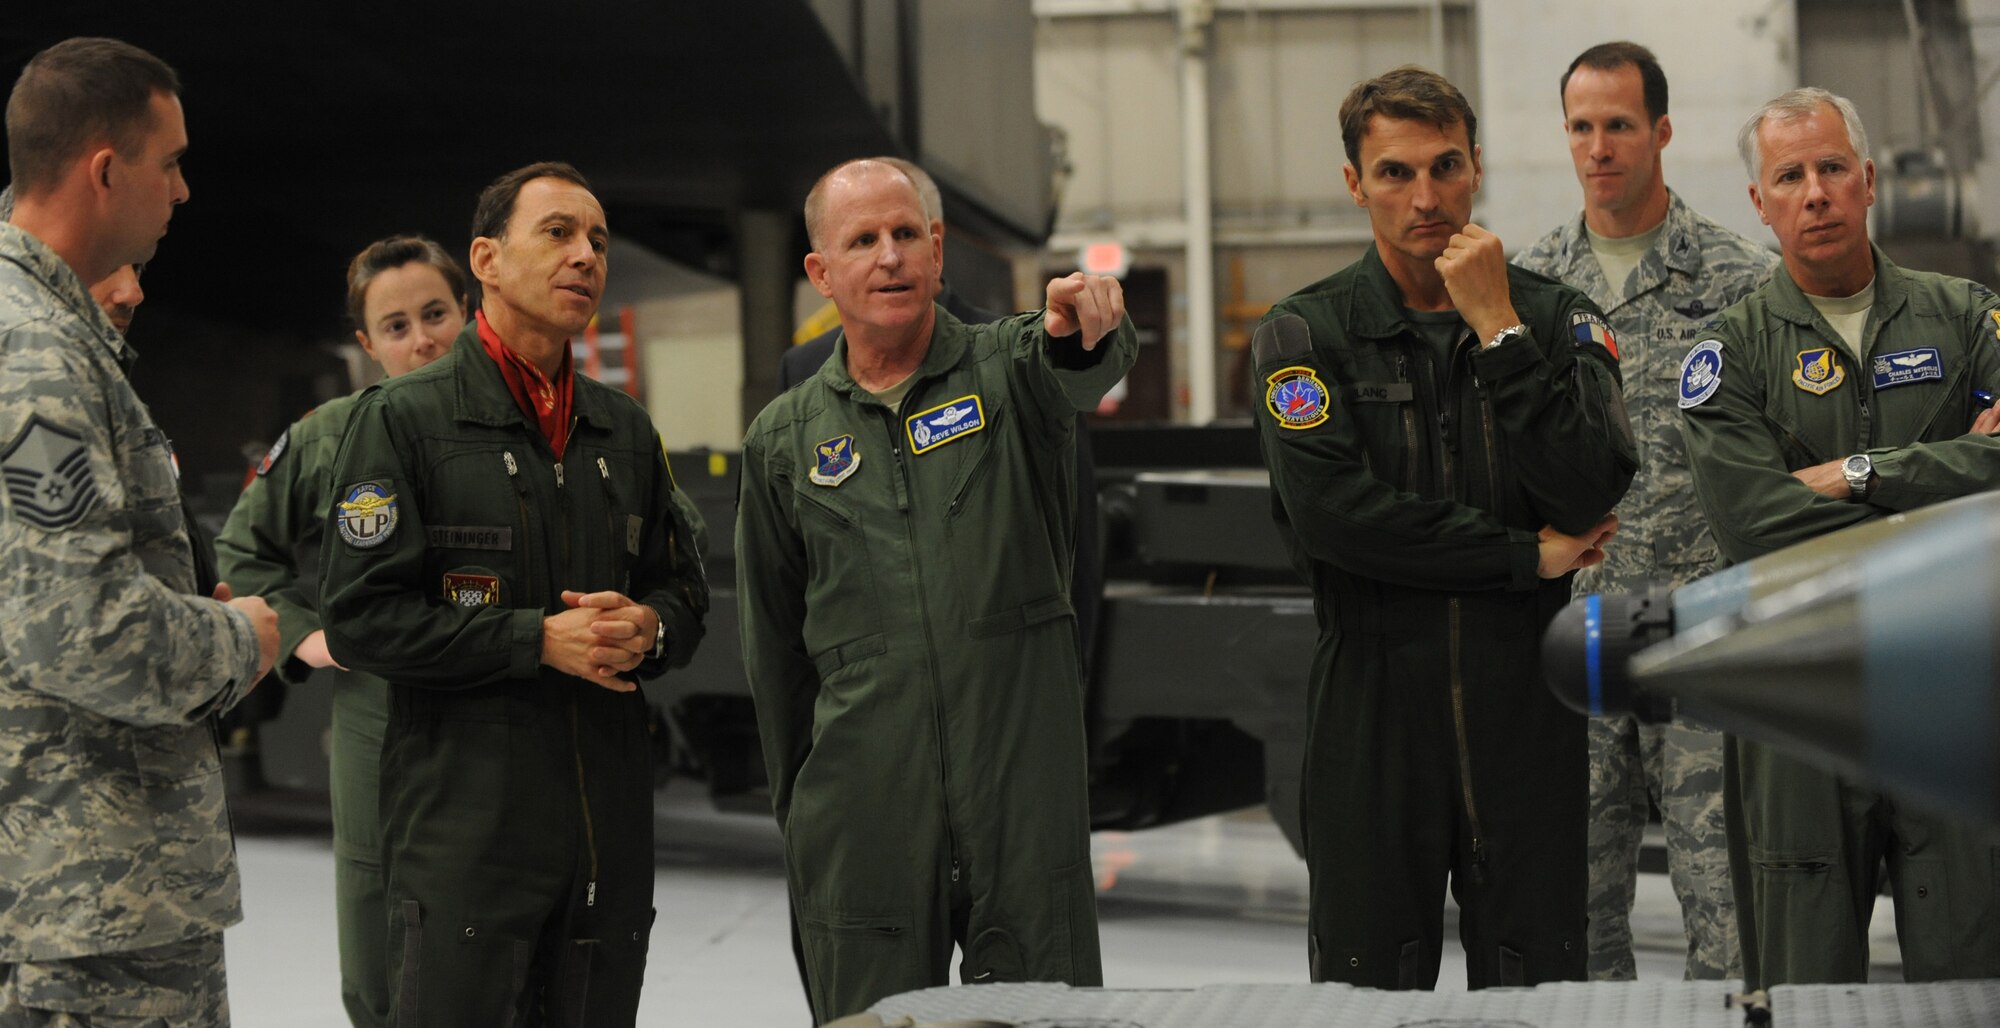 U.S. Air Force Lt. Gen. Stephen Wilson, Air Force Global Strike Command commander, explains the wing’s mission to Lt. Gen. Philippe Steininger, commander of the French Air Force’s Strategic Air Forces Command, at Whiteman Air Force Base, Mo., May 26, 2015. Since its standup in 2009, AFGSC has worked to build and maintain a strong relationship with its allies in the French air forces. (U.S. Air Force photo by Staff Sgt. Alexandra M. Longfellow/Released)